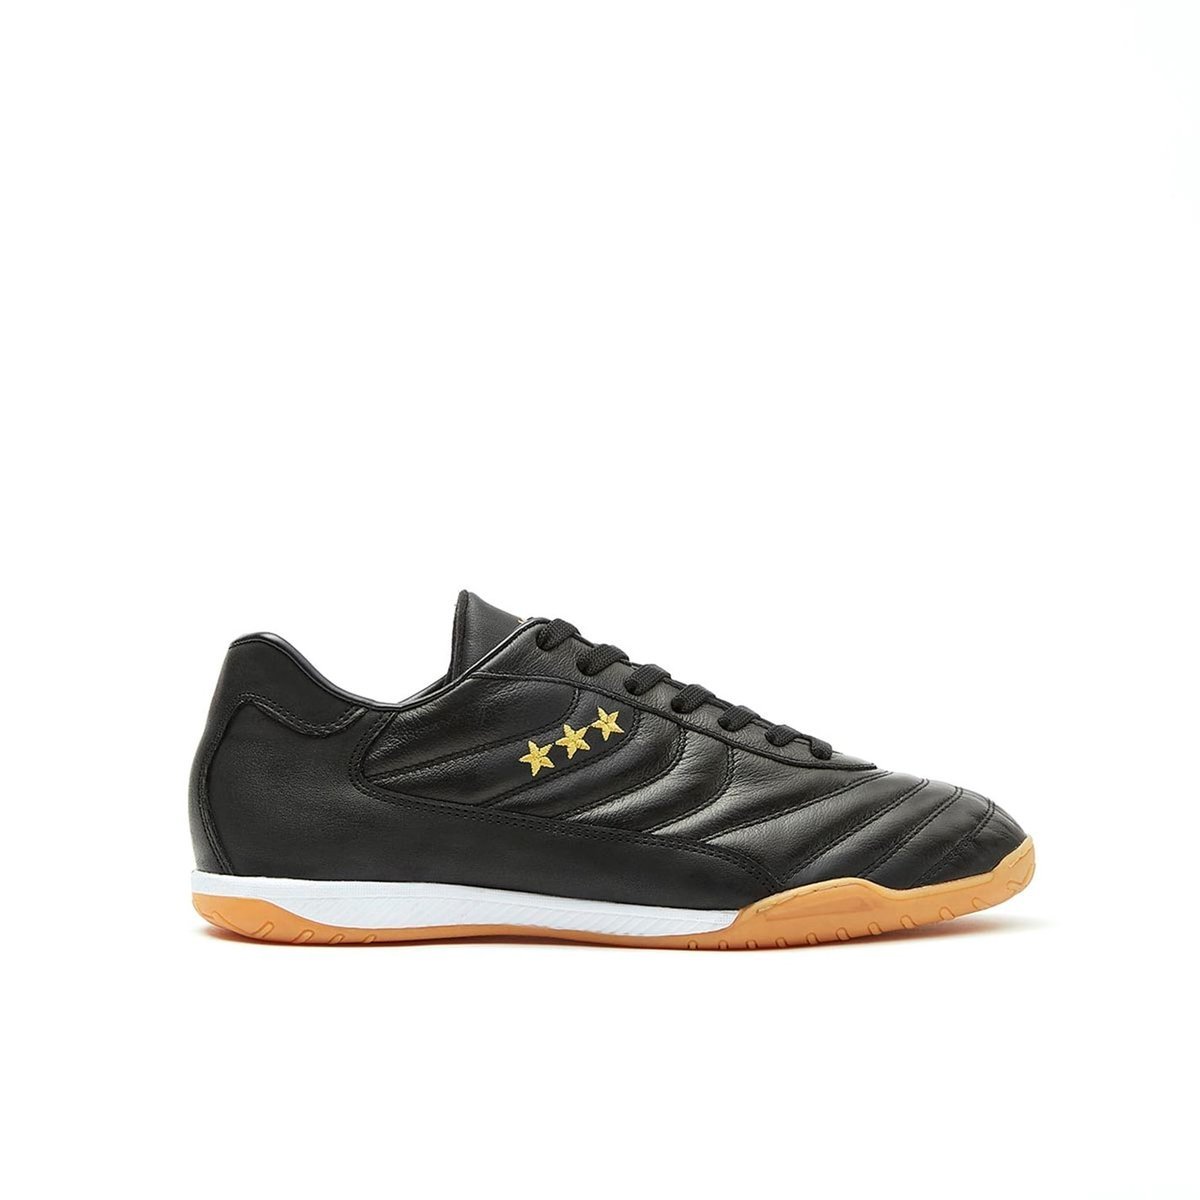 Munich G3 Profit IN Indoor Football Shoes Black